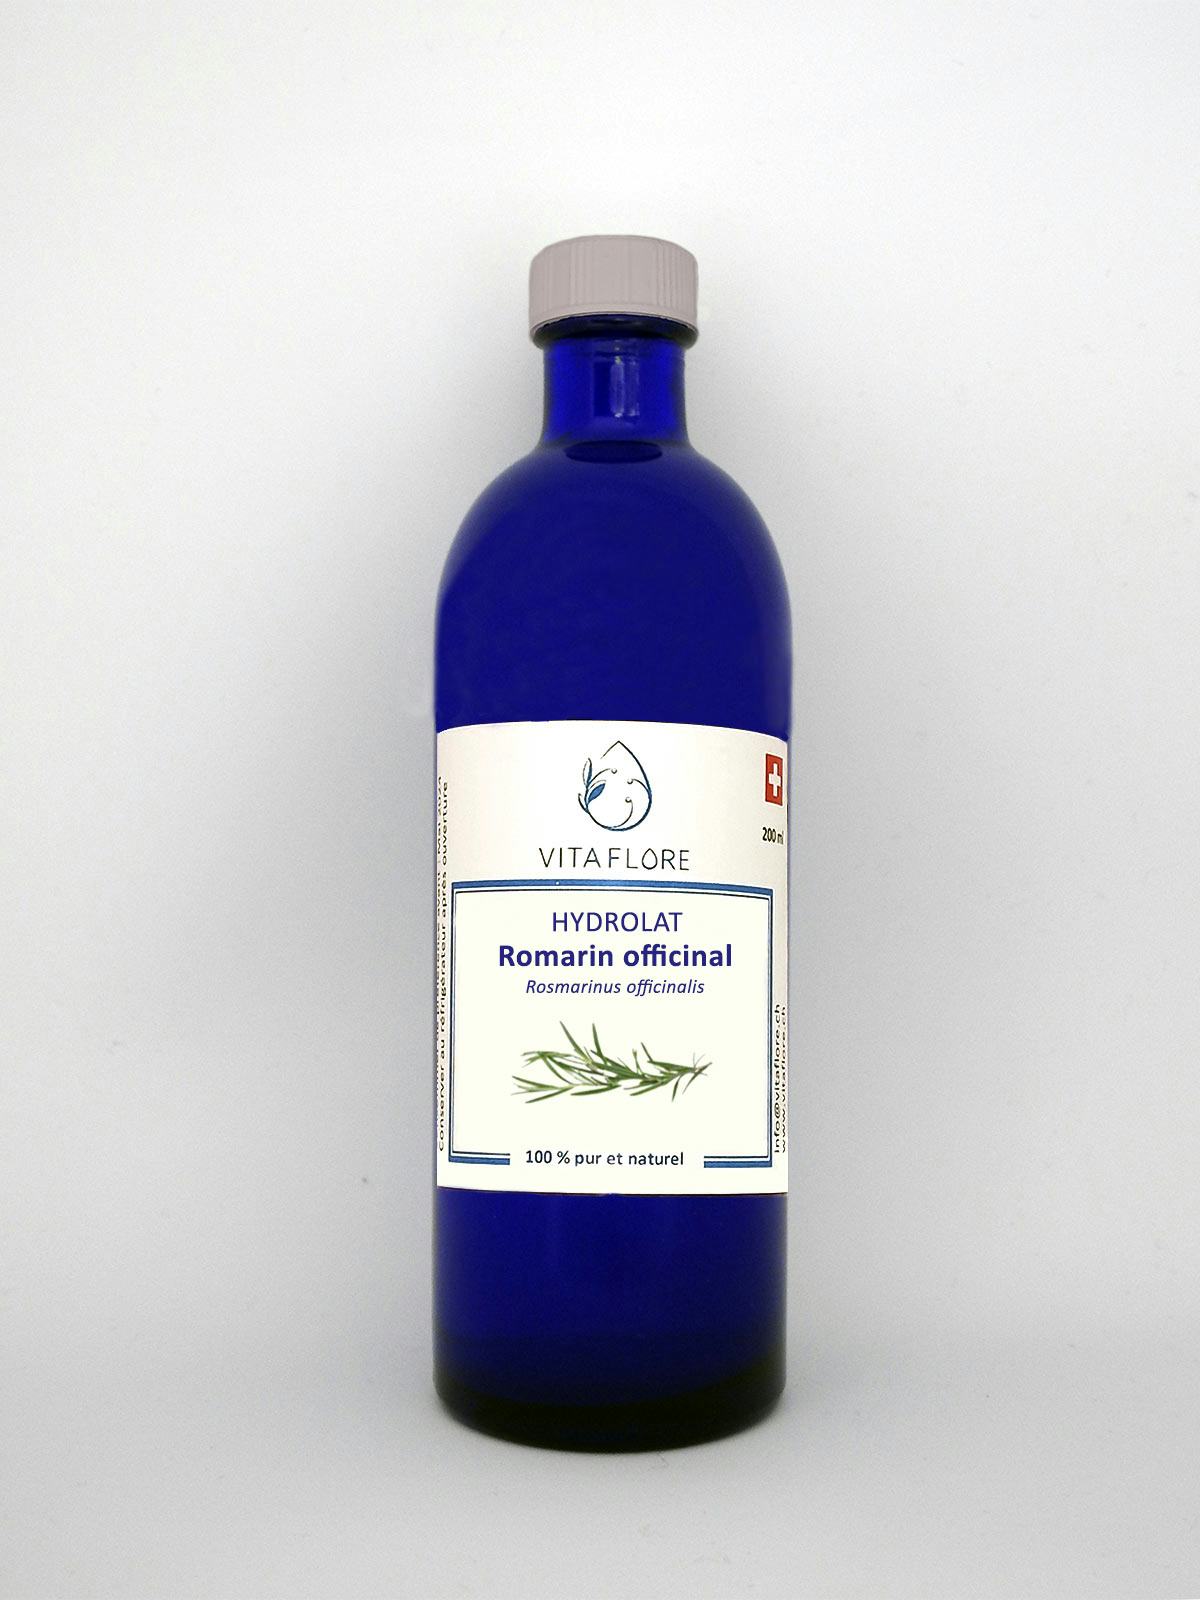 Rosemary officinal hydrosol, artisanal product for direct sale in Switzerland